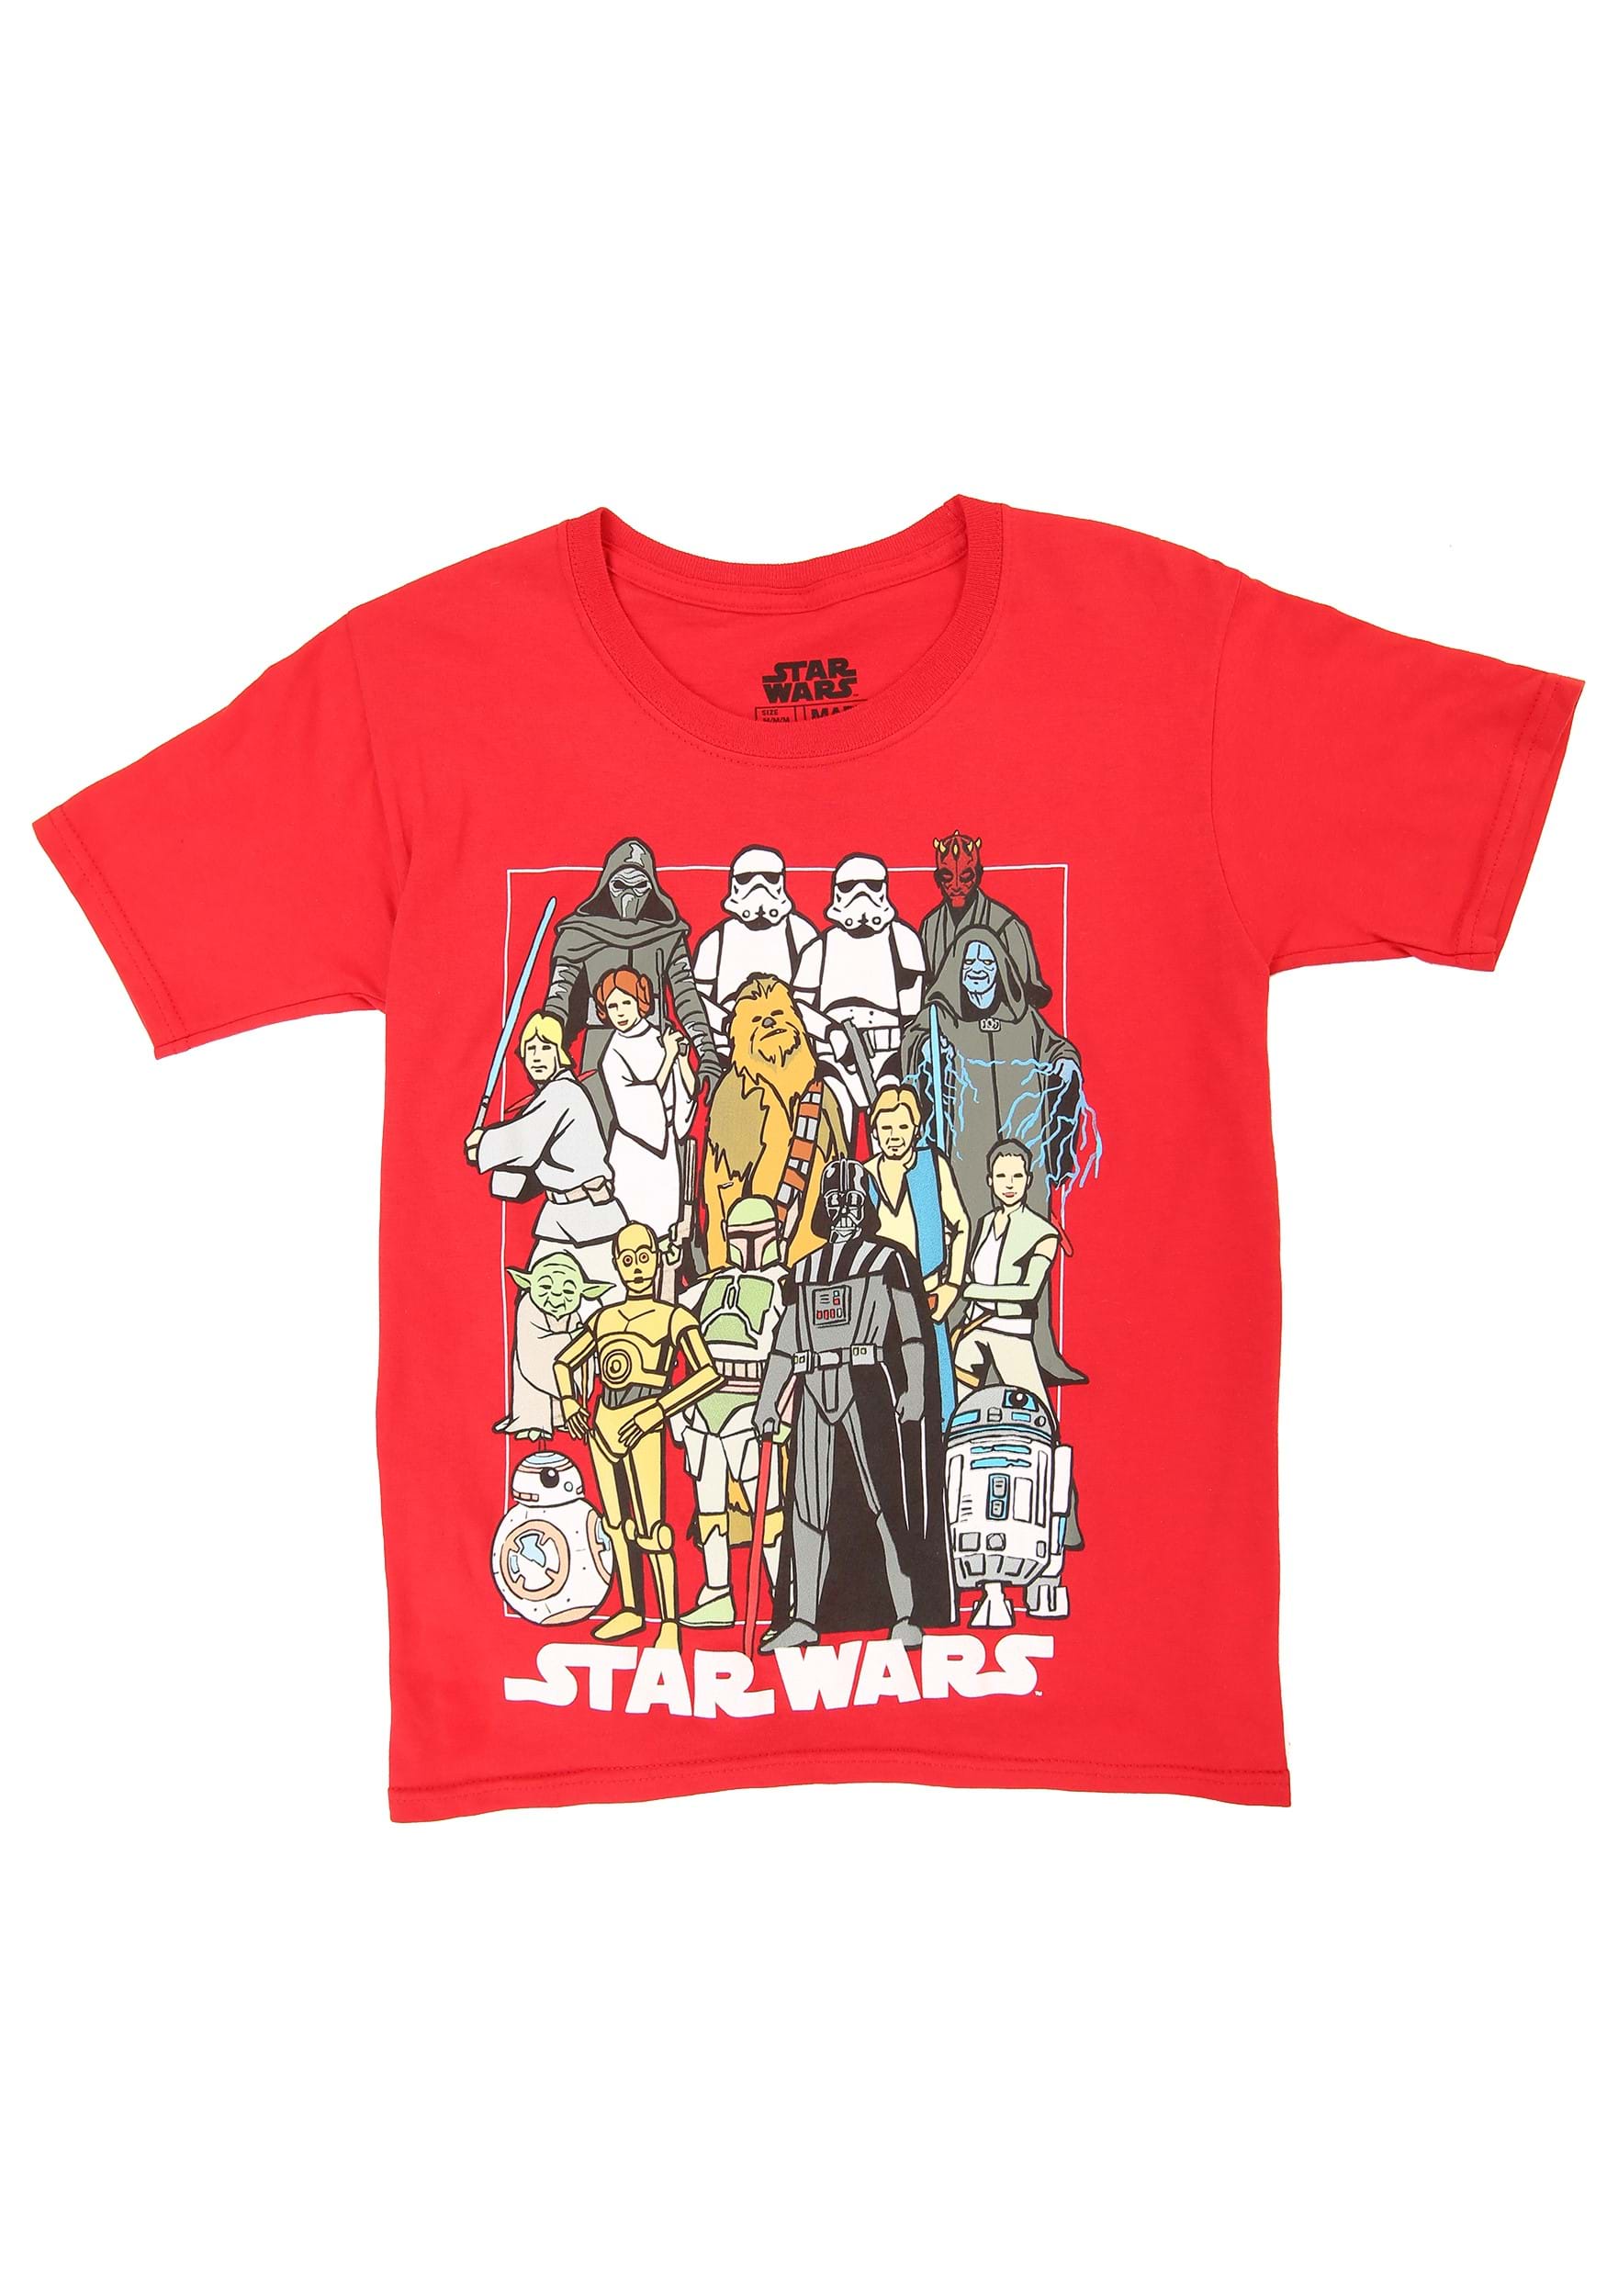 Official MLB Star Wars Collection, MLB Star Wars Tees, Hoodies, Accessories